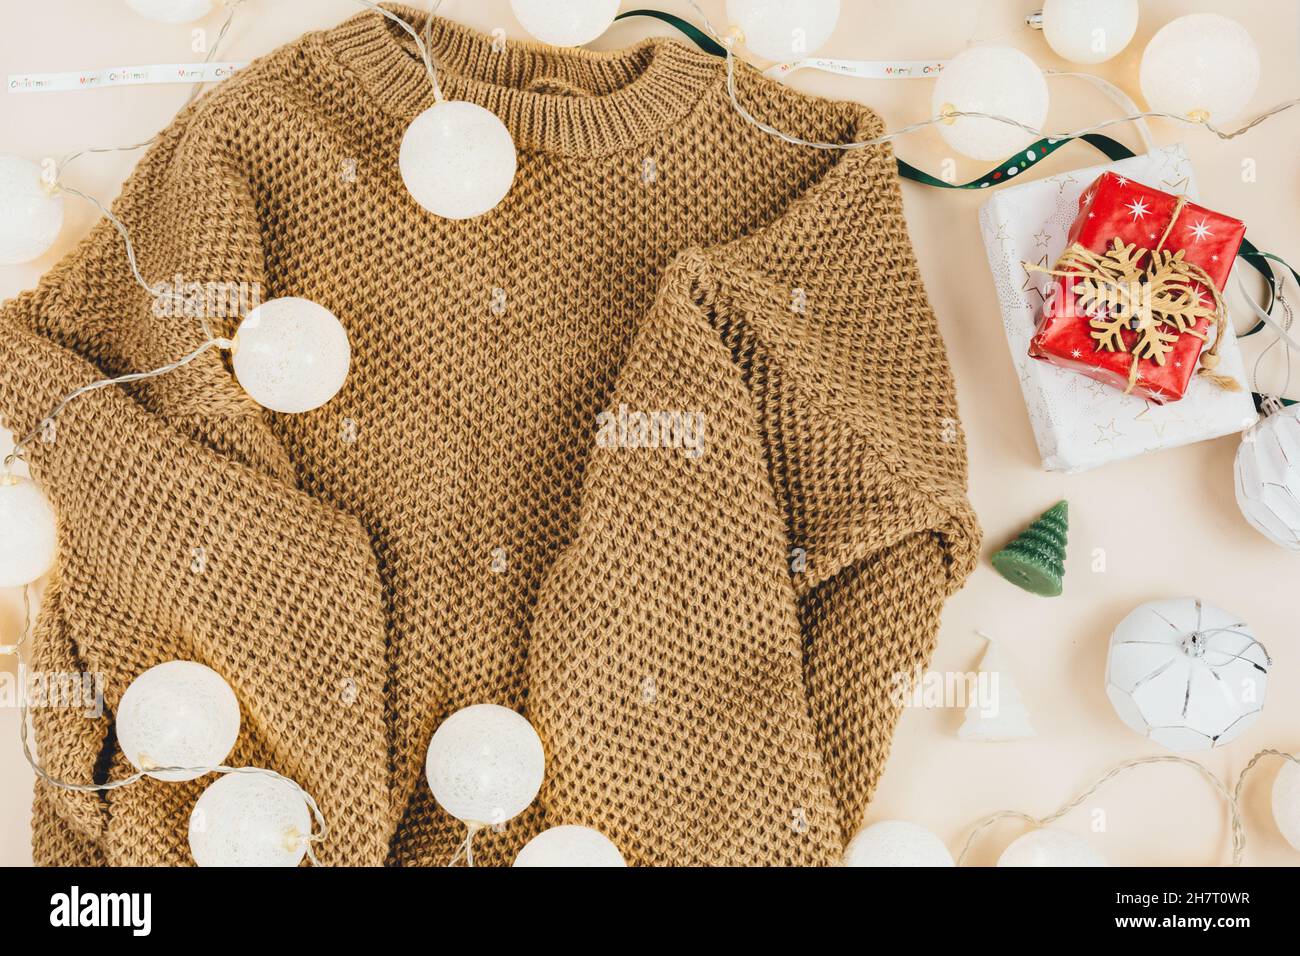 Brown knitted sweater and garlands, led lights. Women fashion winter clothes and accessories. New year and Christmas celebration mockup. Christmas Stock Photo